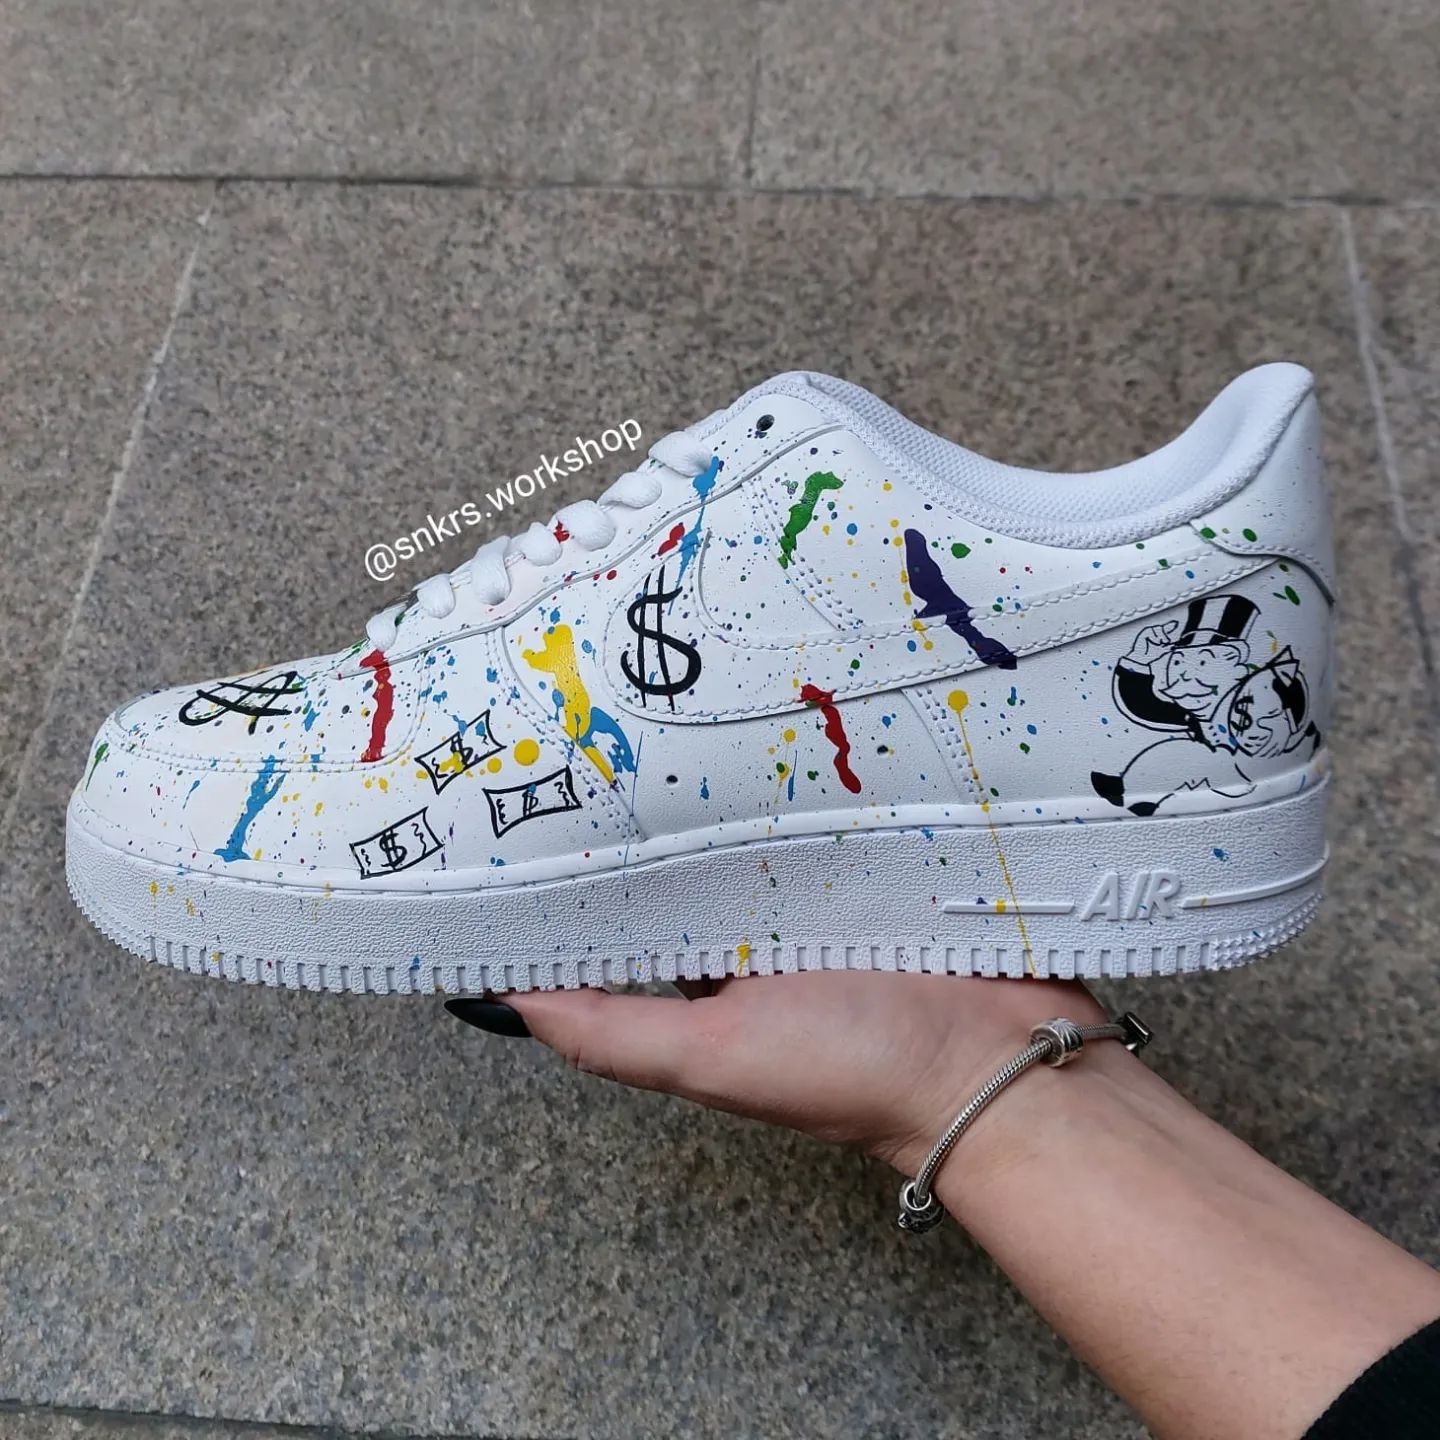 Nike Air Force 1 LV Custom Sneakers Monopoly Richie Rich Shoes 10 1/2